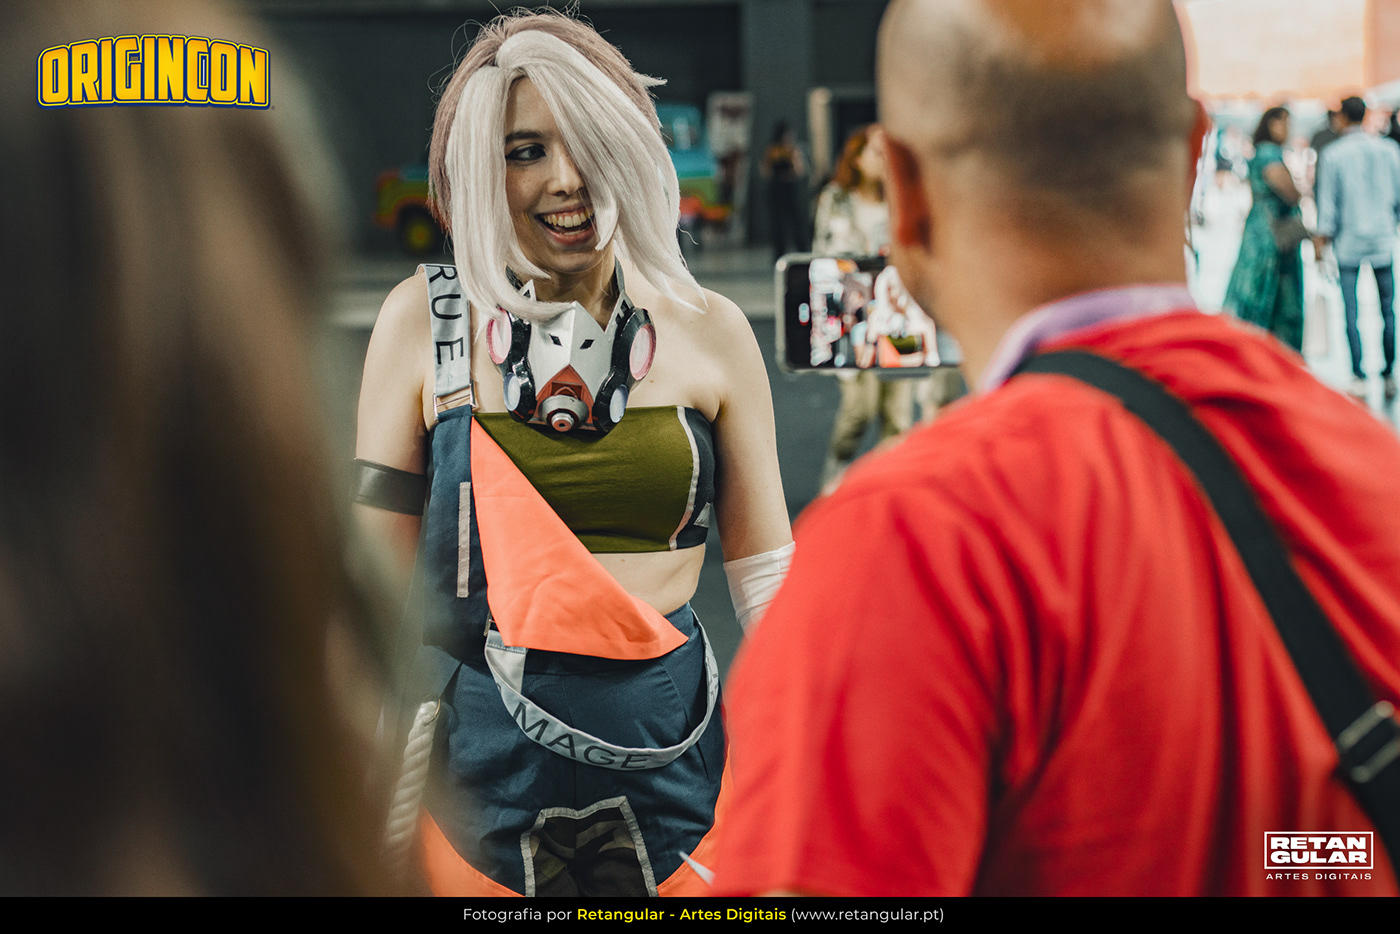 anime Cosplay Event Comic Con pop culture event photography photoshoot Super Hero colorful pictures